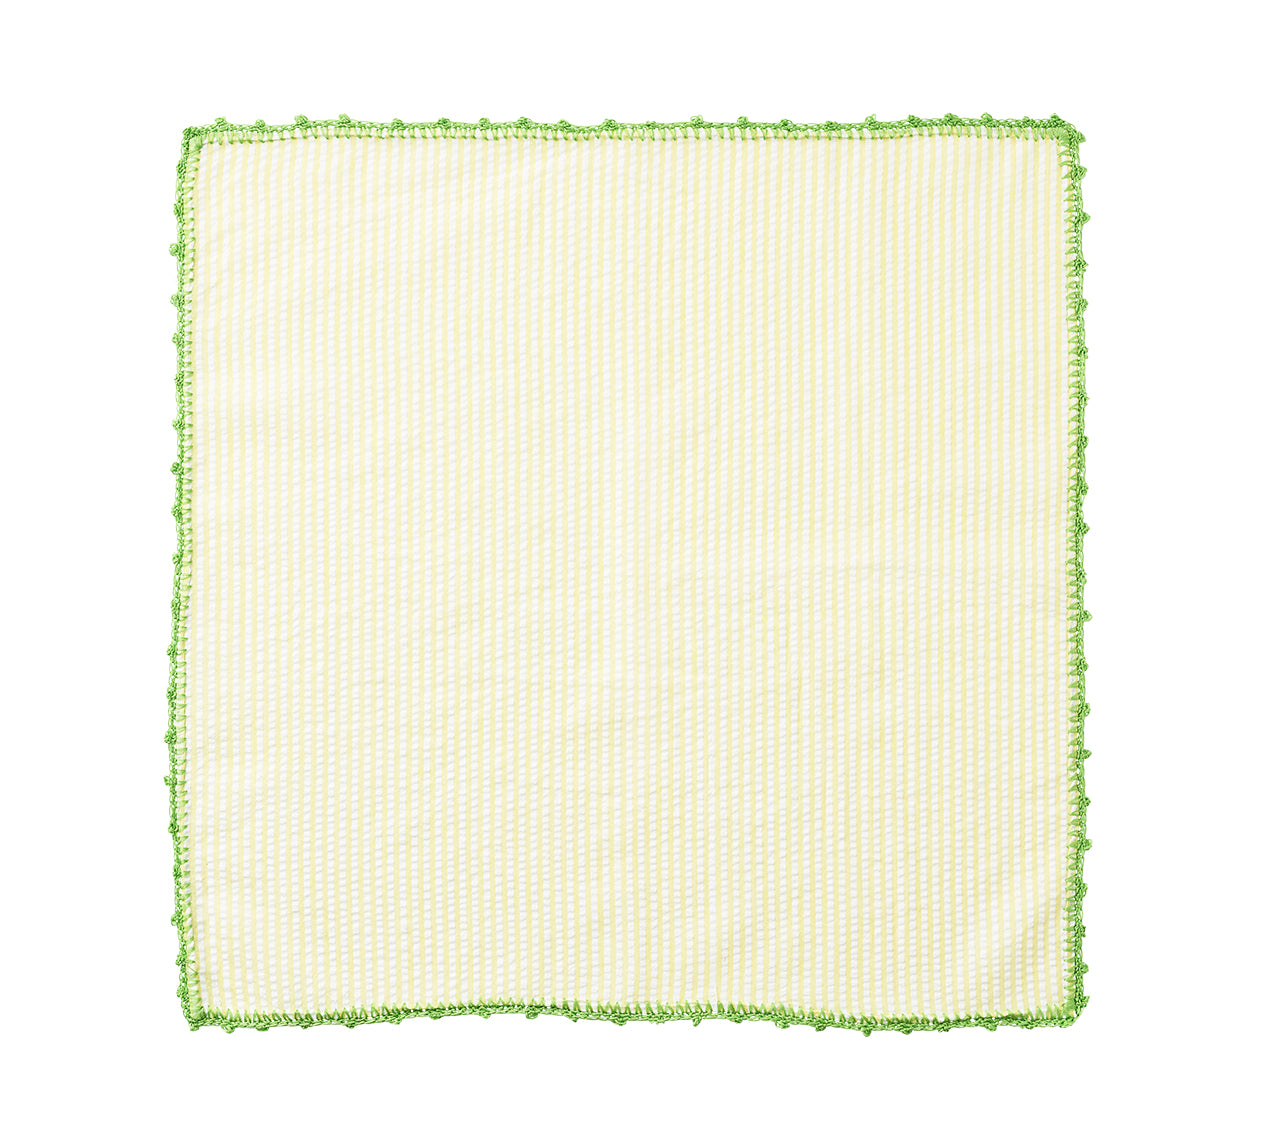 Yellow-striped Seersucker Napkin with a green border, unfolded